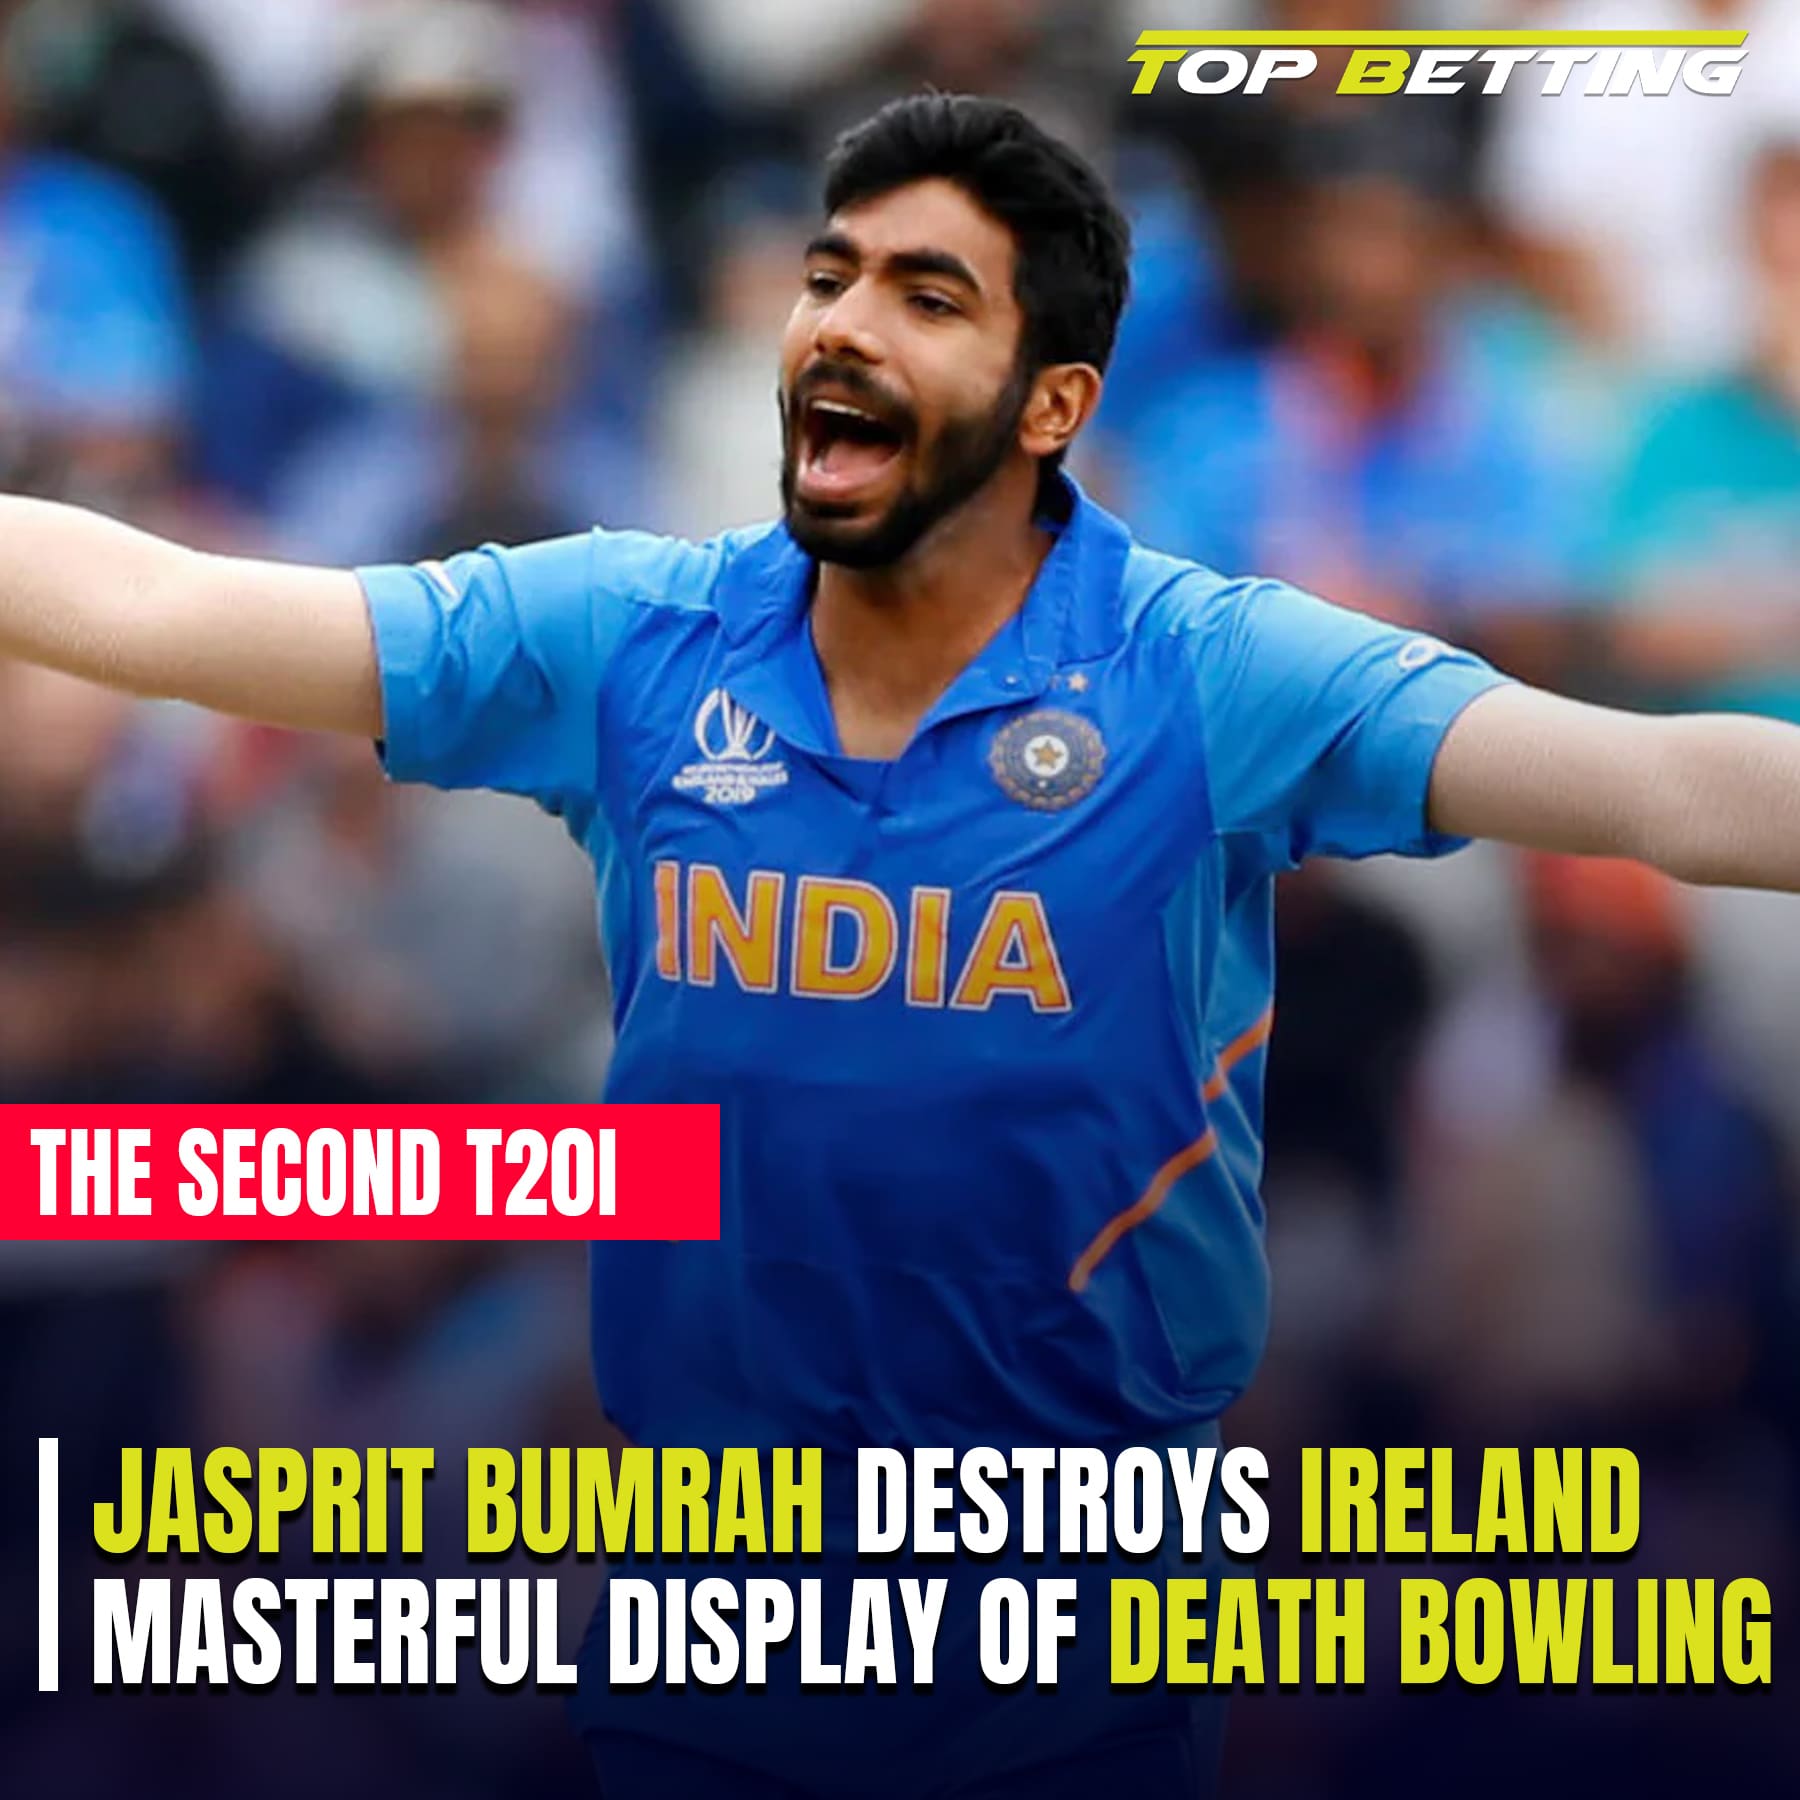 Jasprit Bumrah destroys Ireland with a masterful display of death bowling in the second T20I